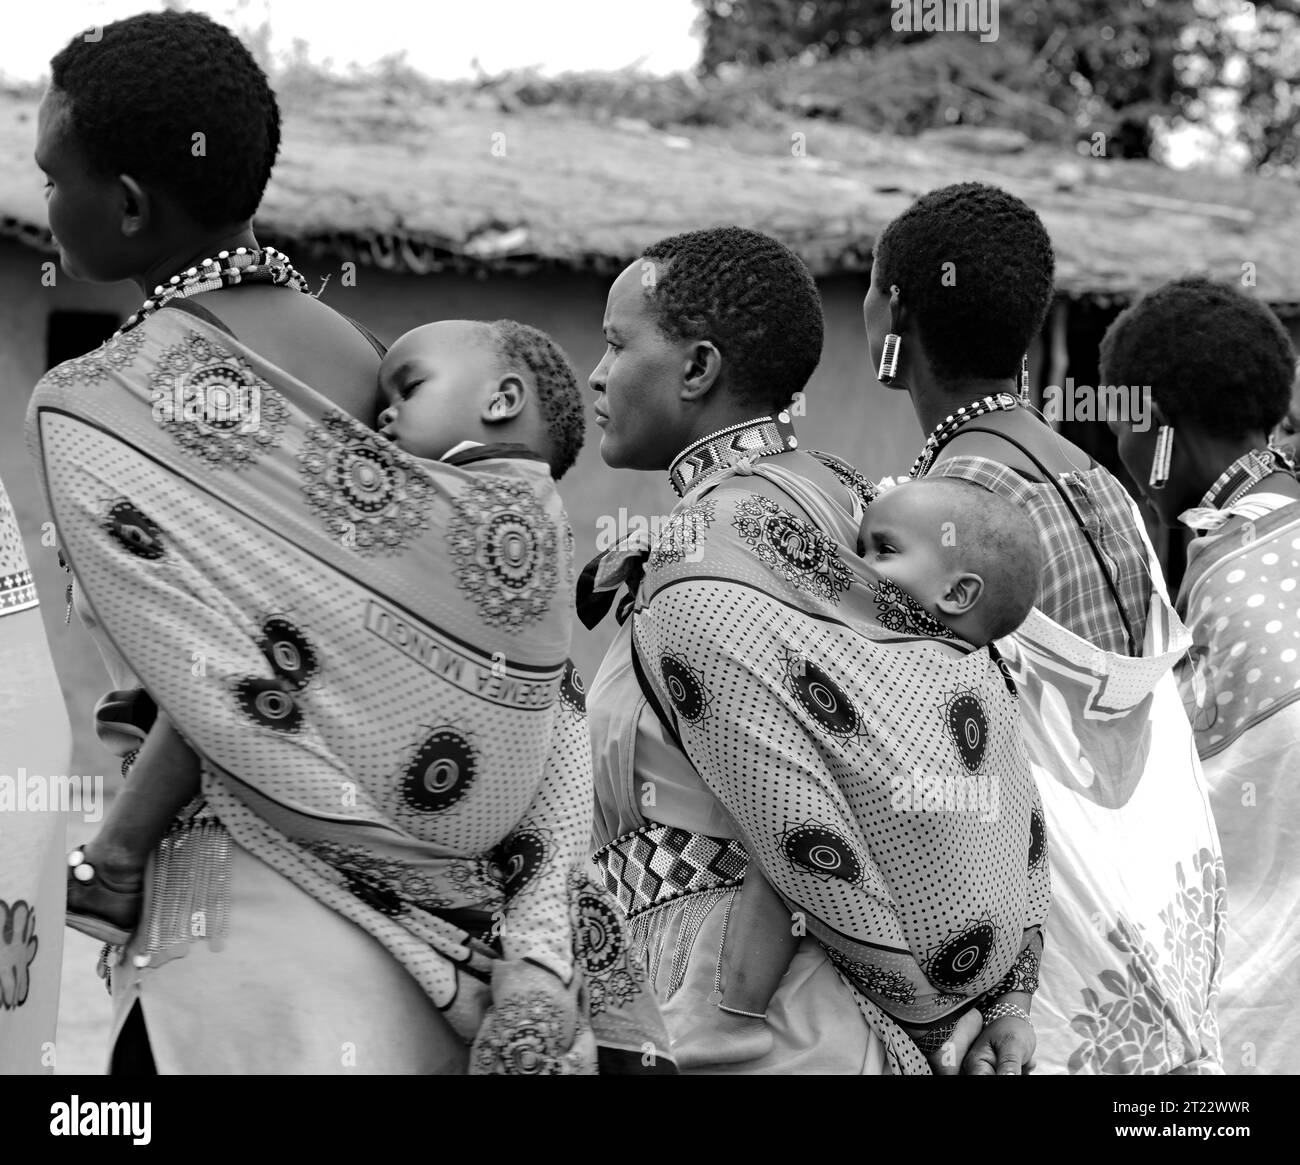 Tribal women of Maasai Mara wearing their traditional dress carrying their kids and entertaining the visitors in their village Stock Photo